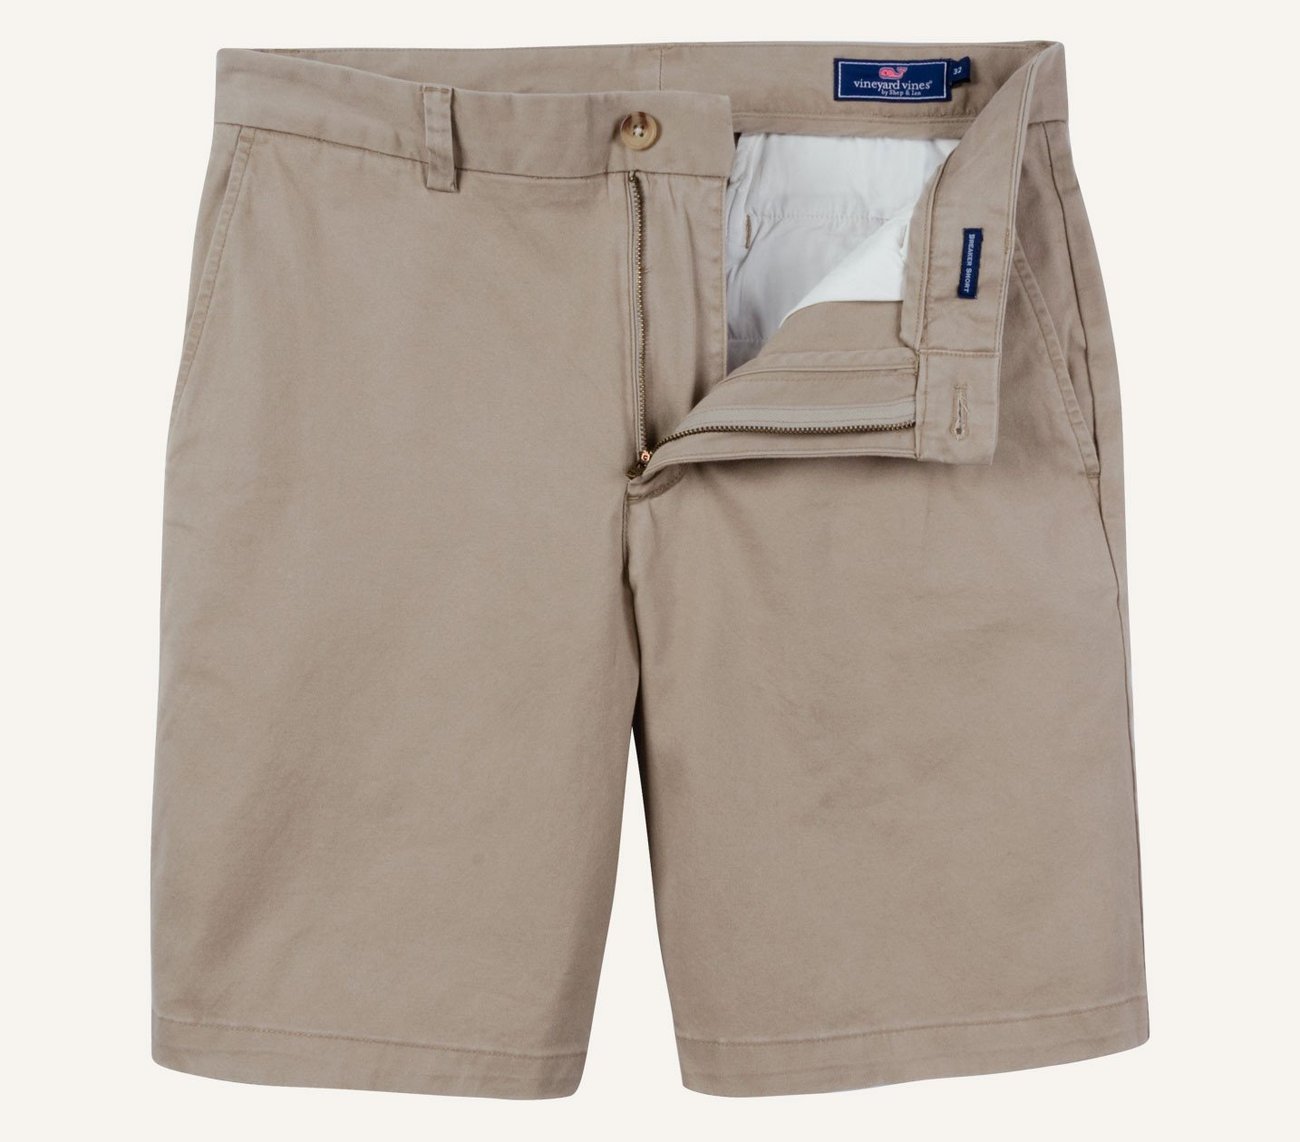 Need New Shorts? Here Are The 7 Best Shorts For Men That Look Timeless ...